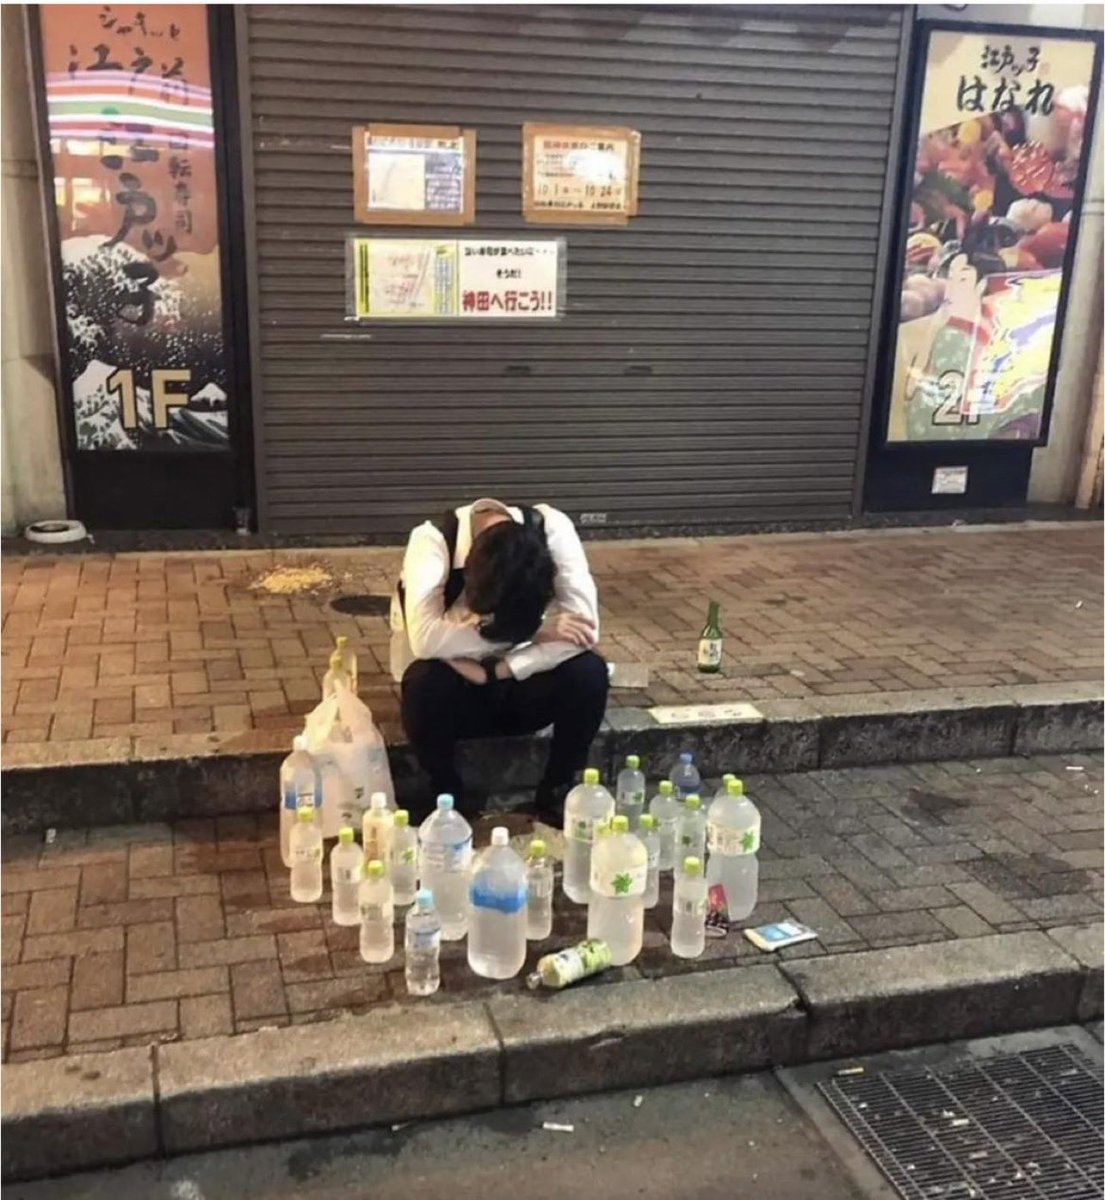 🇯🇵This is Japan. This man got drunk and fell asleep on the street. Then a kind person placed a bottle of water in front of him and walked away. Other people did the same, so he was surrounded by water.🤣🤣🤣